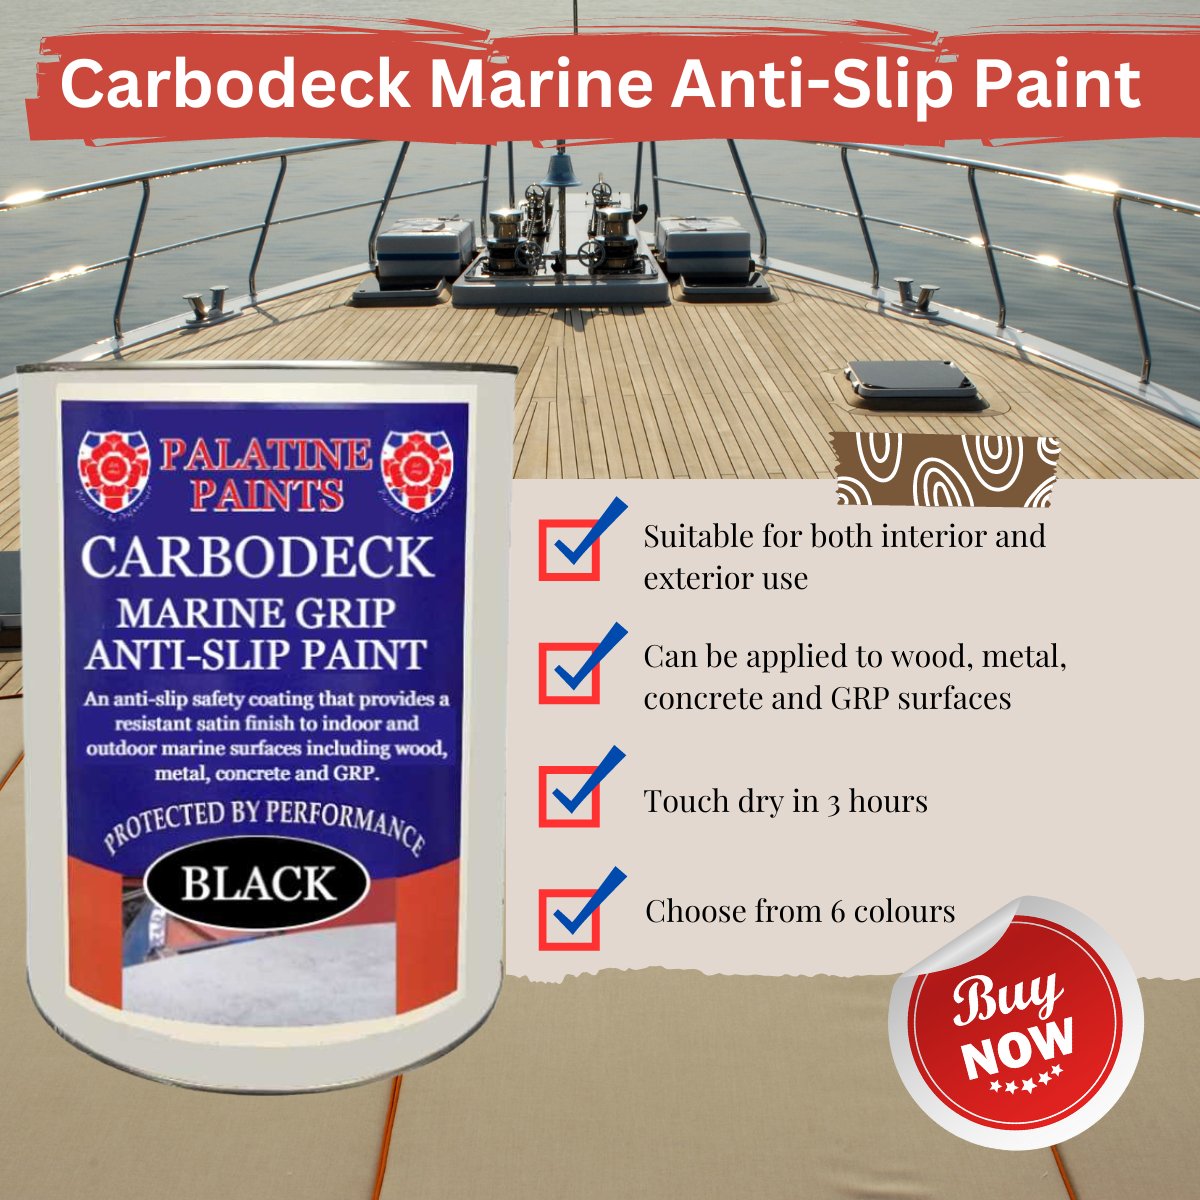 Carbodeck Marine Grip Anti-Slip Paint is a single pack coating designed for use in marine areas and on boat decks. It can be applied to prepared and primed wood, metal, concrete and GRP surfaces. 👉🛒 Buy yours today: palatinepaints.co.uk/product/carbod…